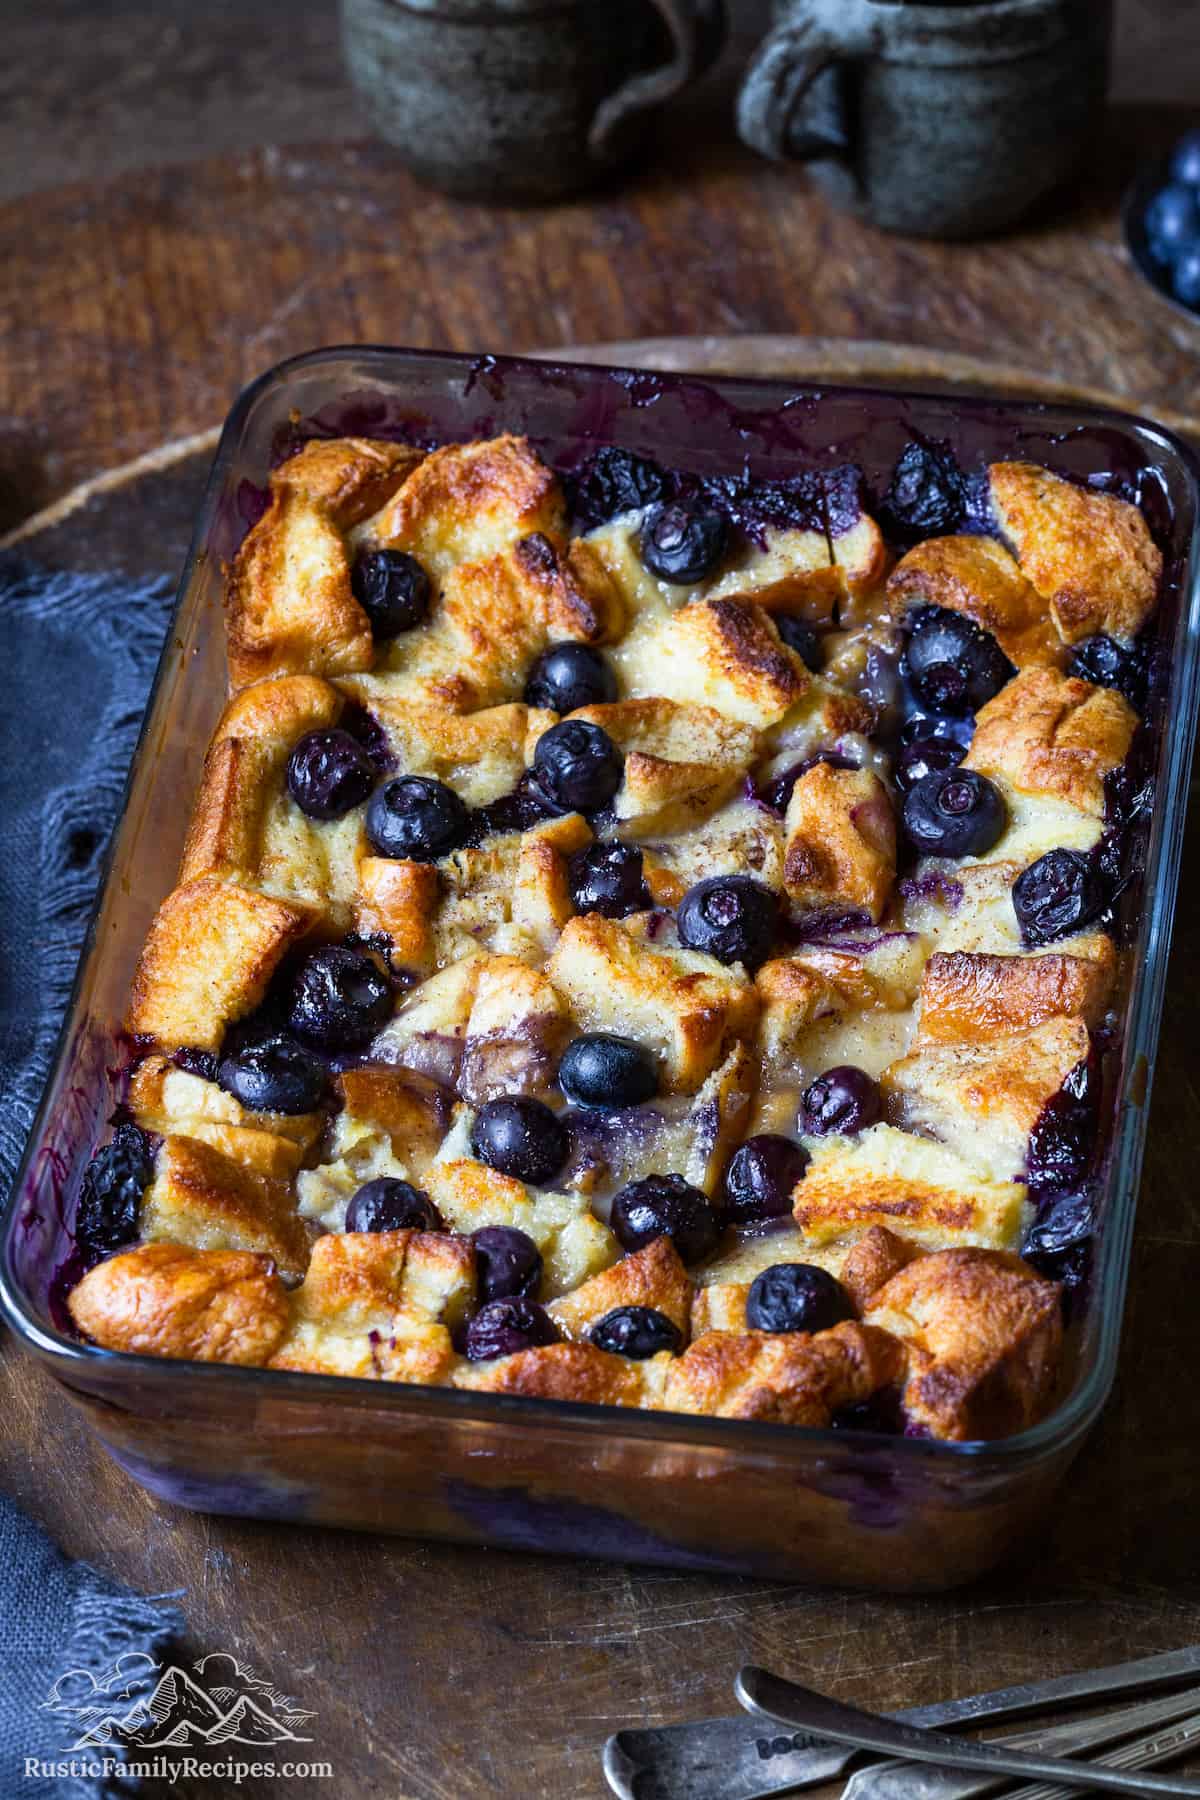 Blueberry bread pudding in a 9x13 casserole dish